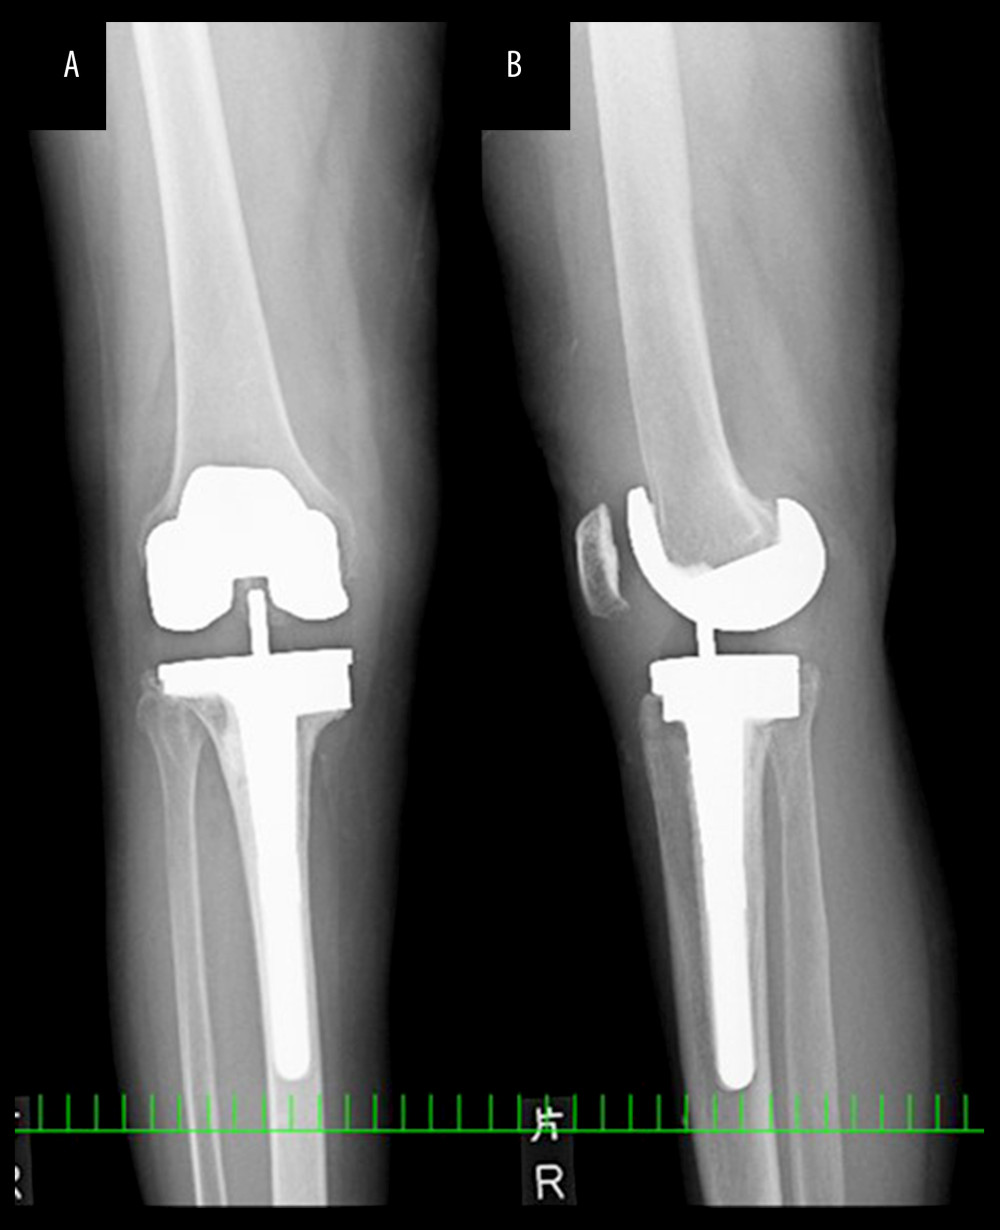 Radiograph of the right knee at the onset of the infection, anteroposterior (A) and lateral (B) views. The radiograph shows no osteolytic lesions and no signs of periprosthetic loosening.